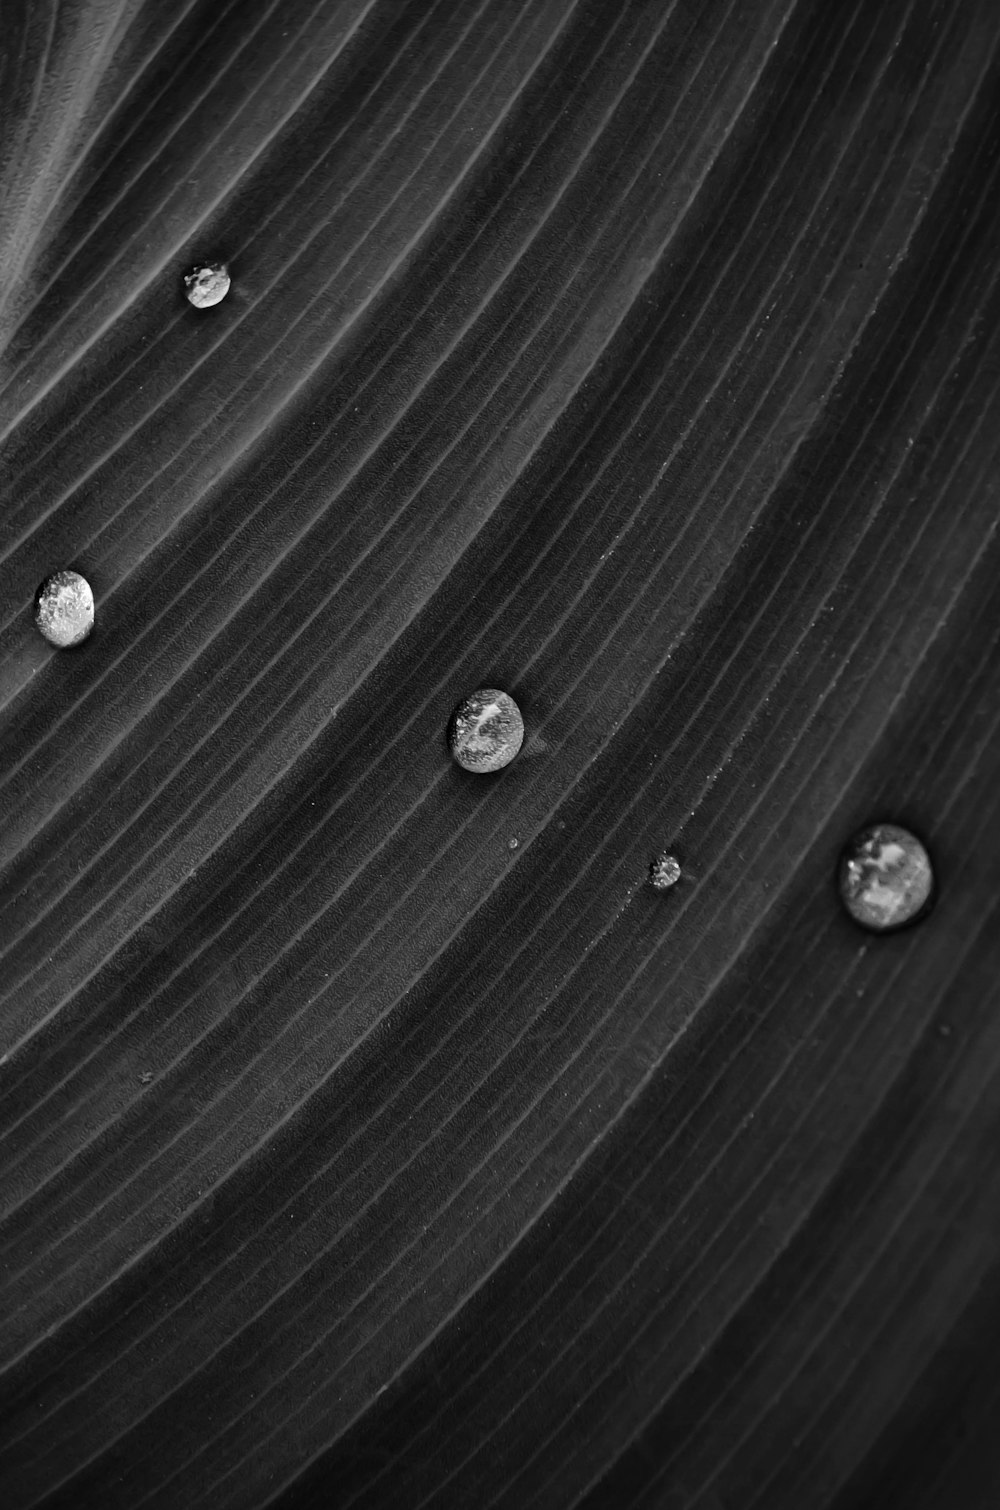 water droplets on black and white striped textile